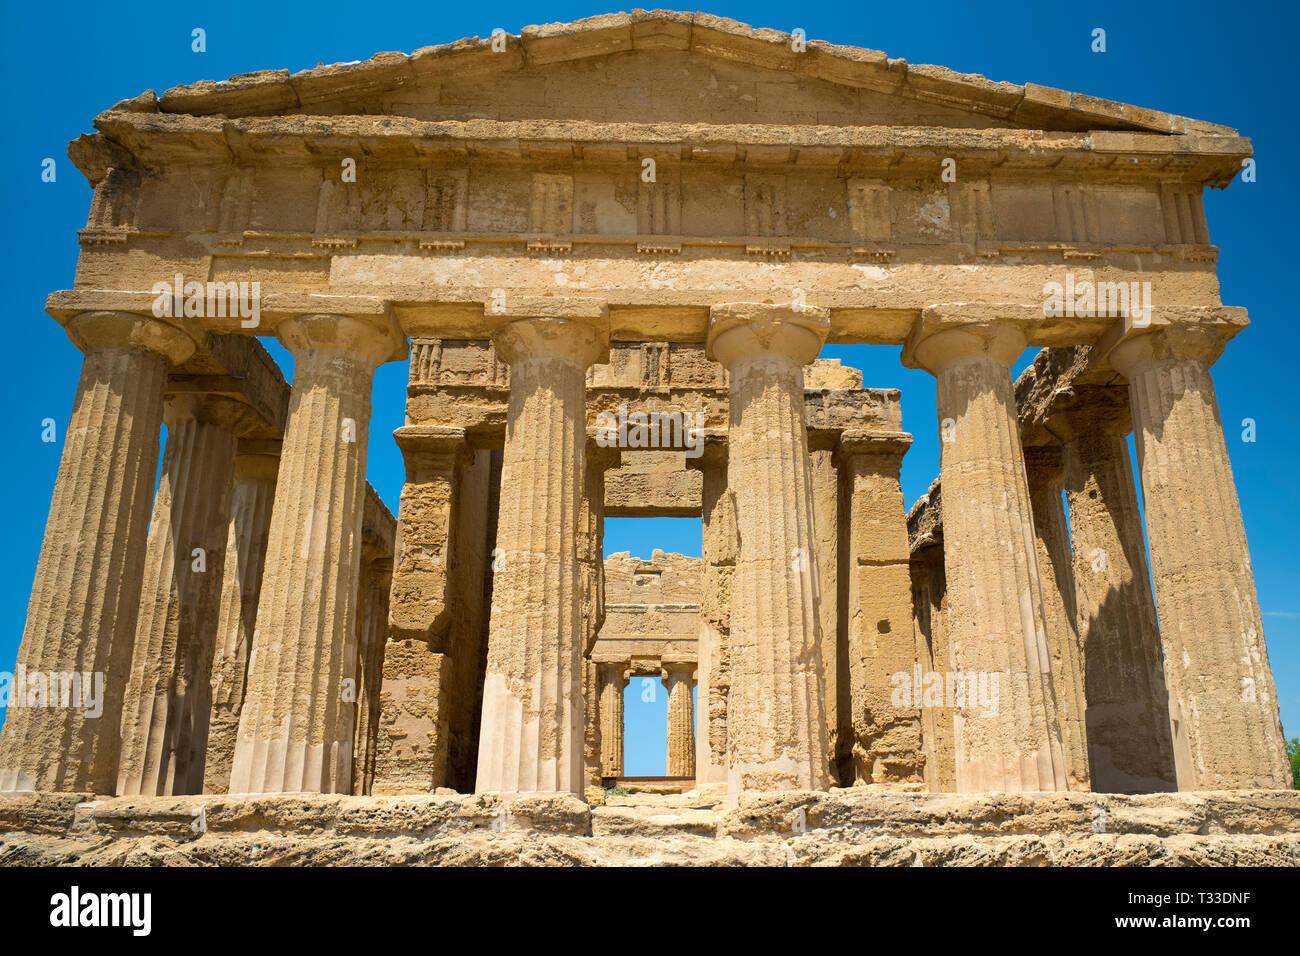 Temple of Concord ( Concordia) front close up view of columns, in the Valley of the Temples, Agrigento, Sicily, Italy Stock Photo